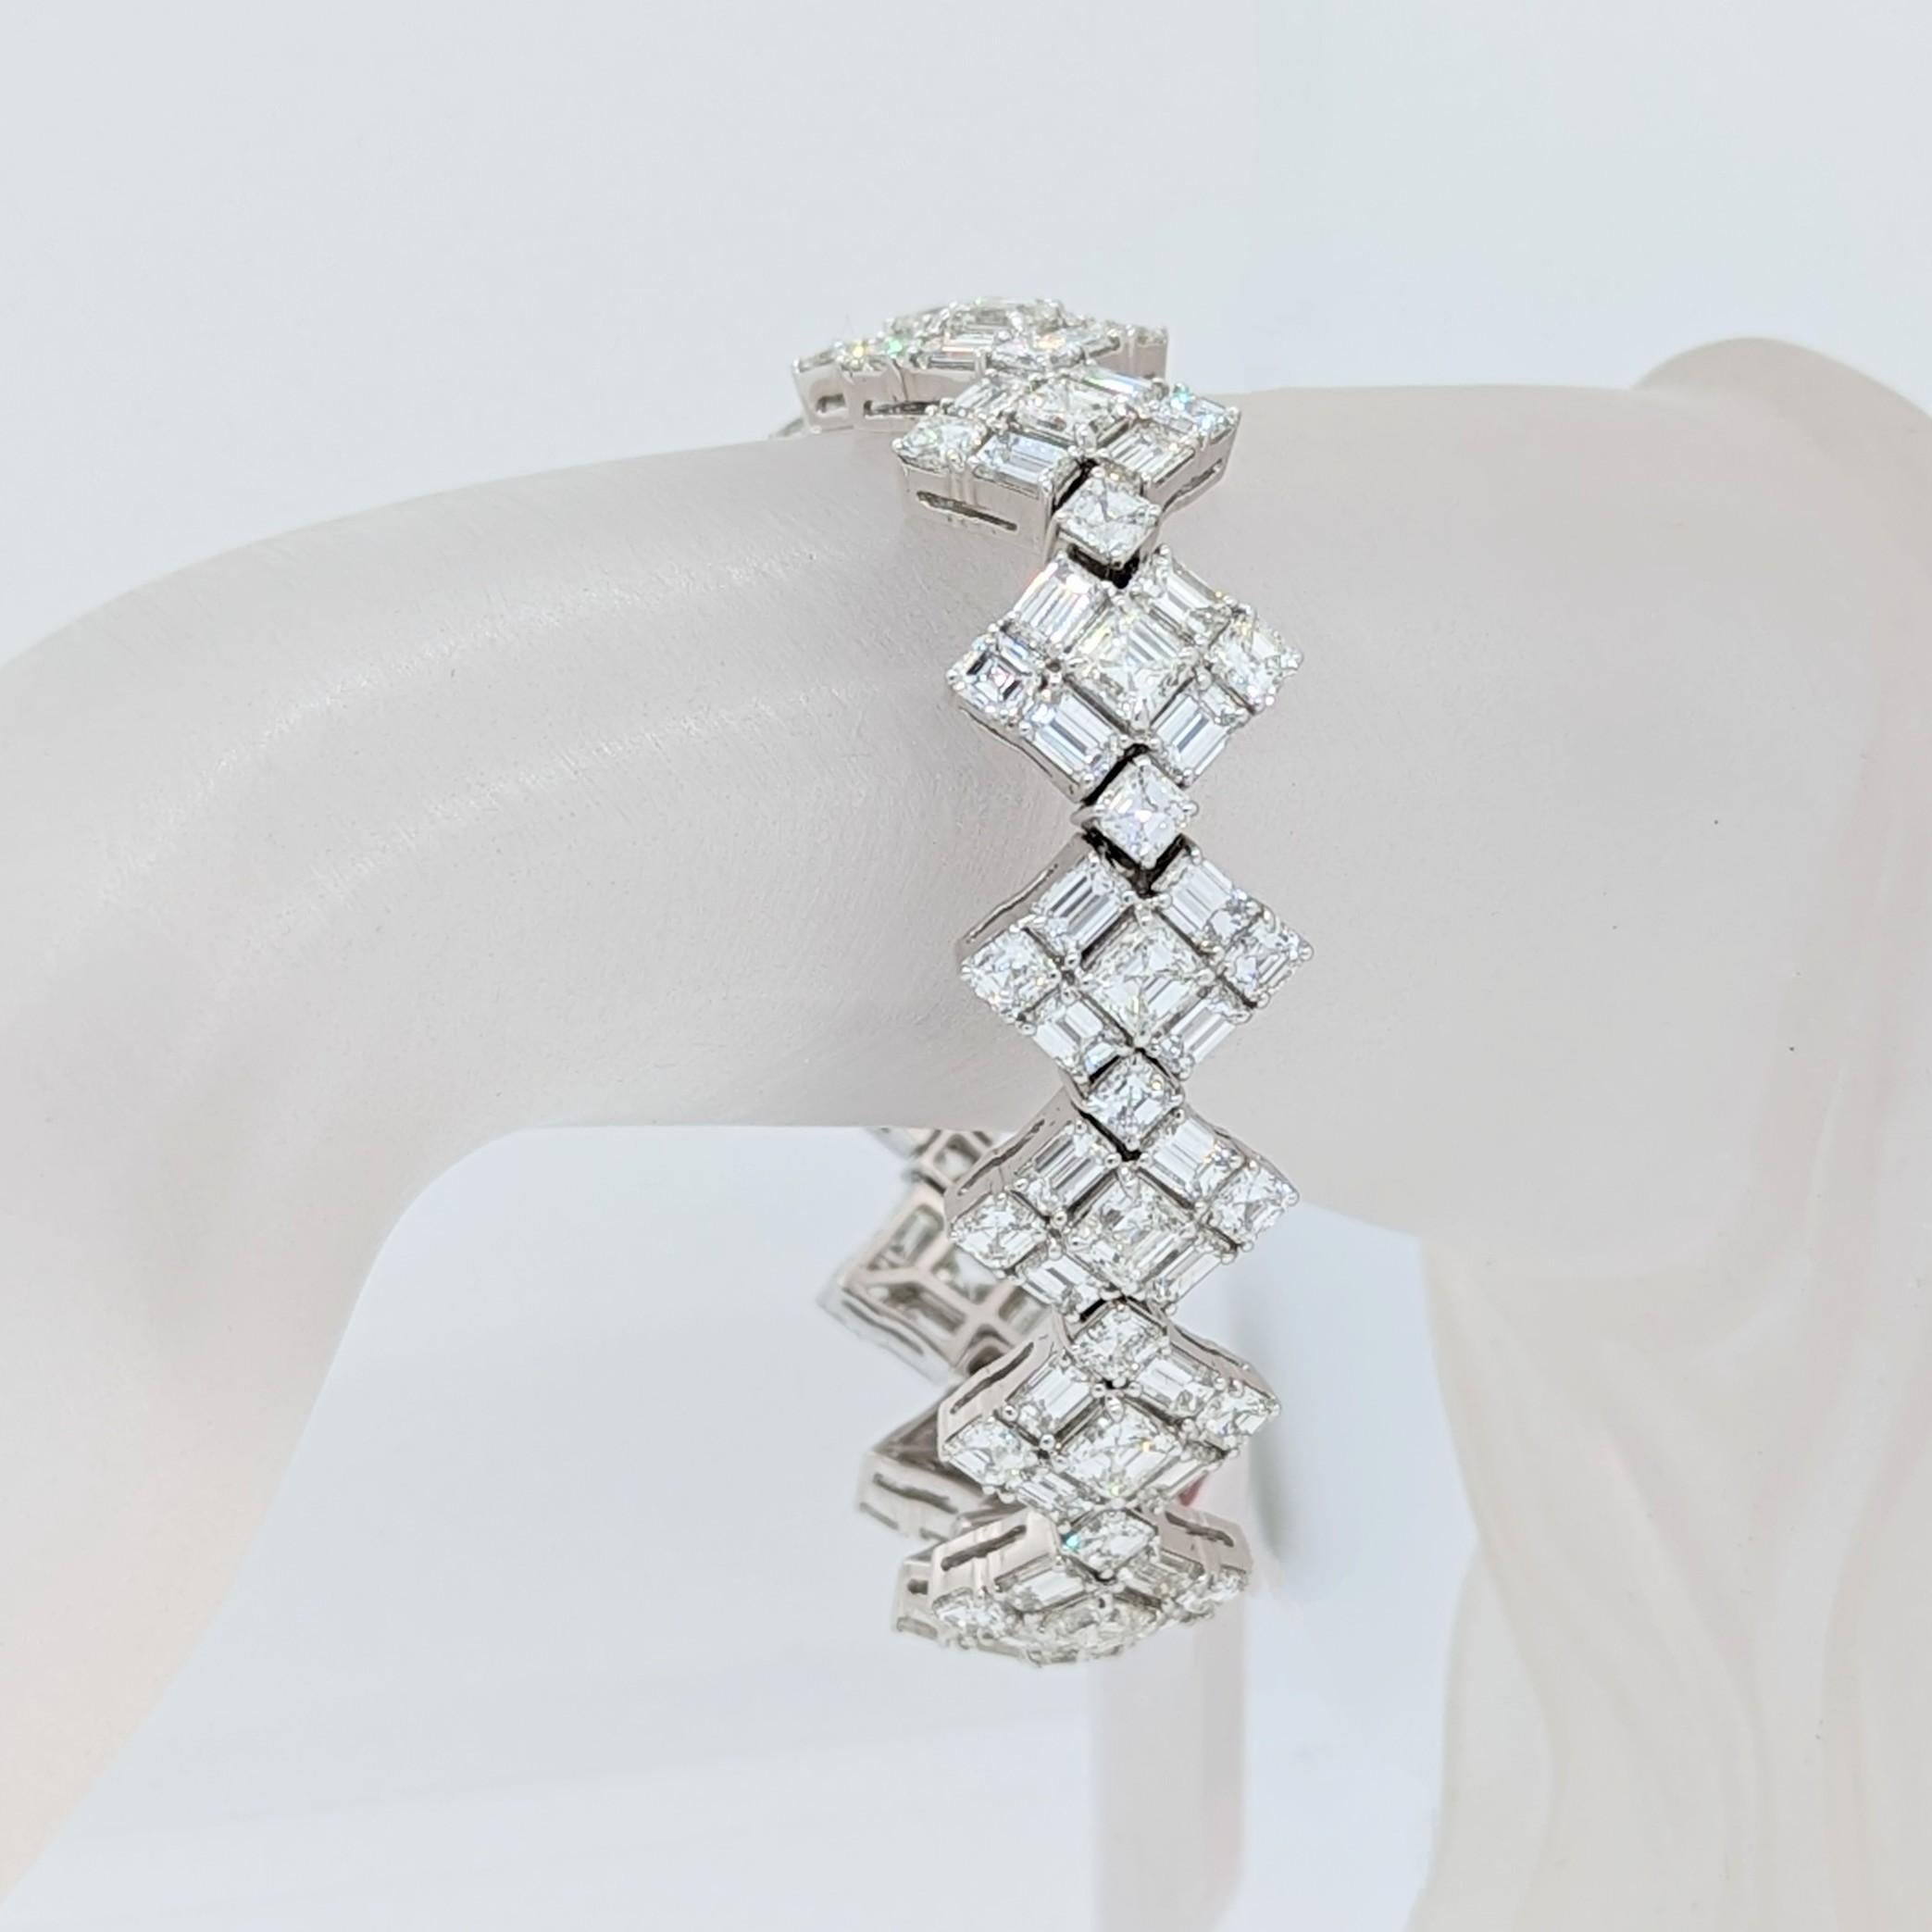 Absolutely stunning 28.46 ct. good quality, white, and bright asscher and emerald cut diamonds (120 stones) handmade in 18k white gold.  Length of bracelet is 7